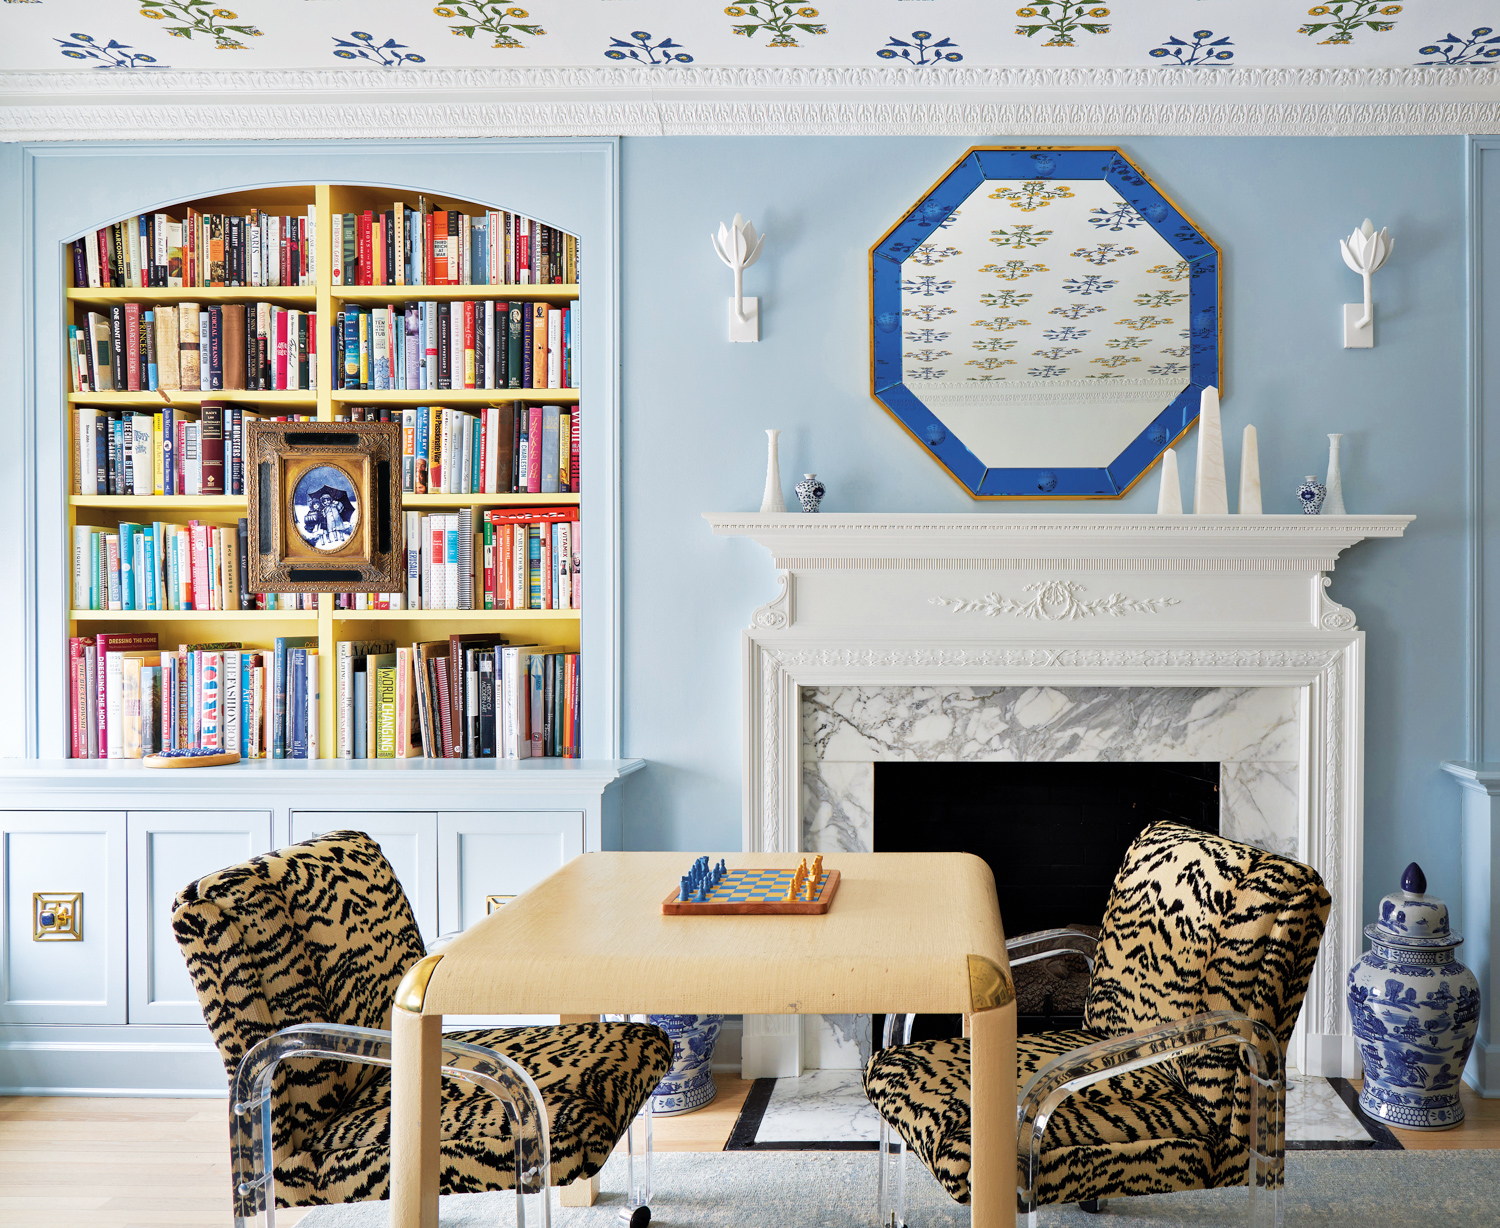 reused furnishings in a living room with a marble fireplace and bookshelves